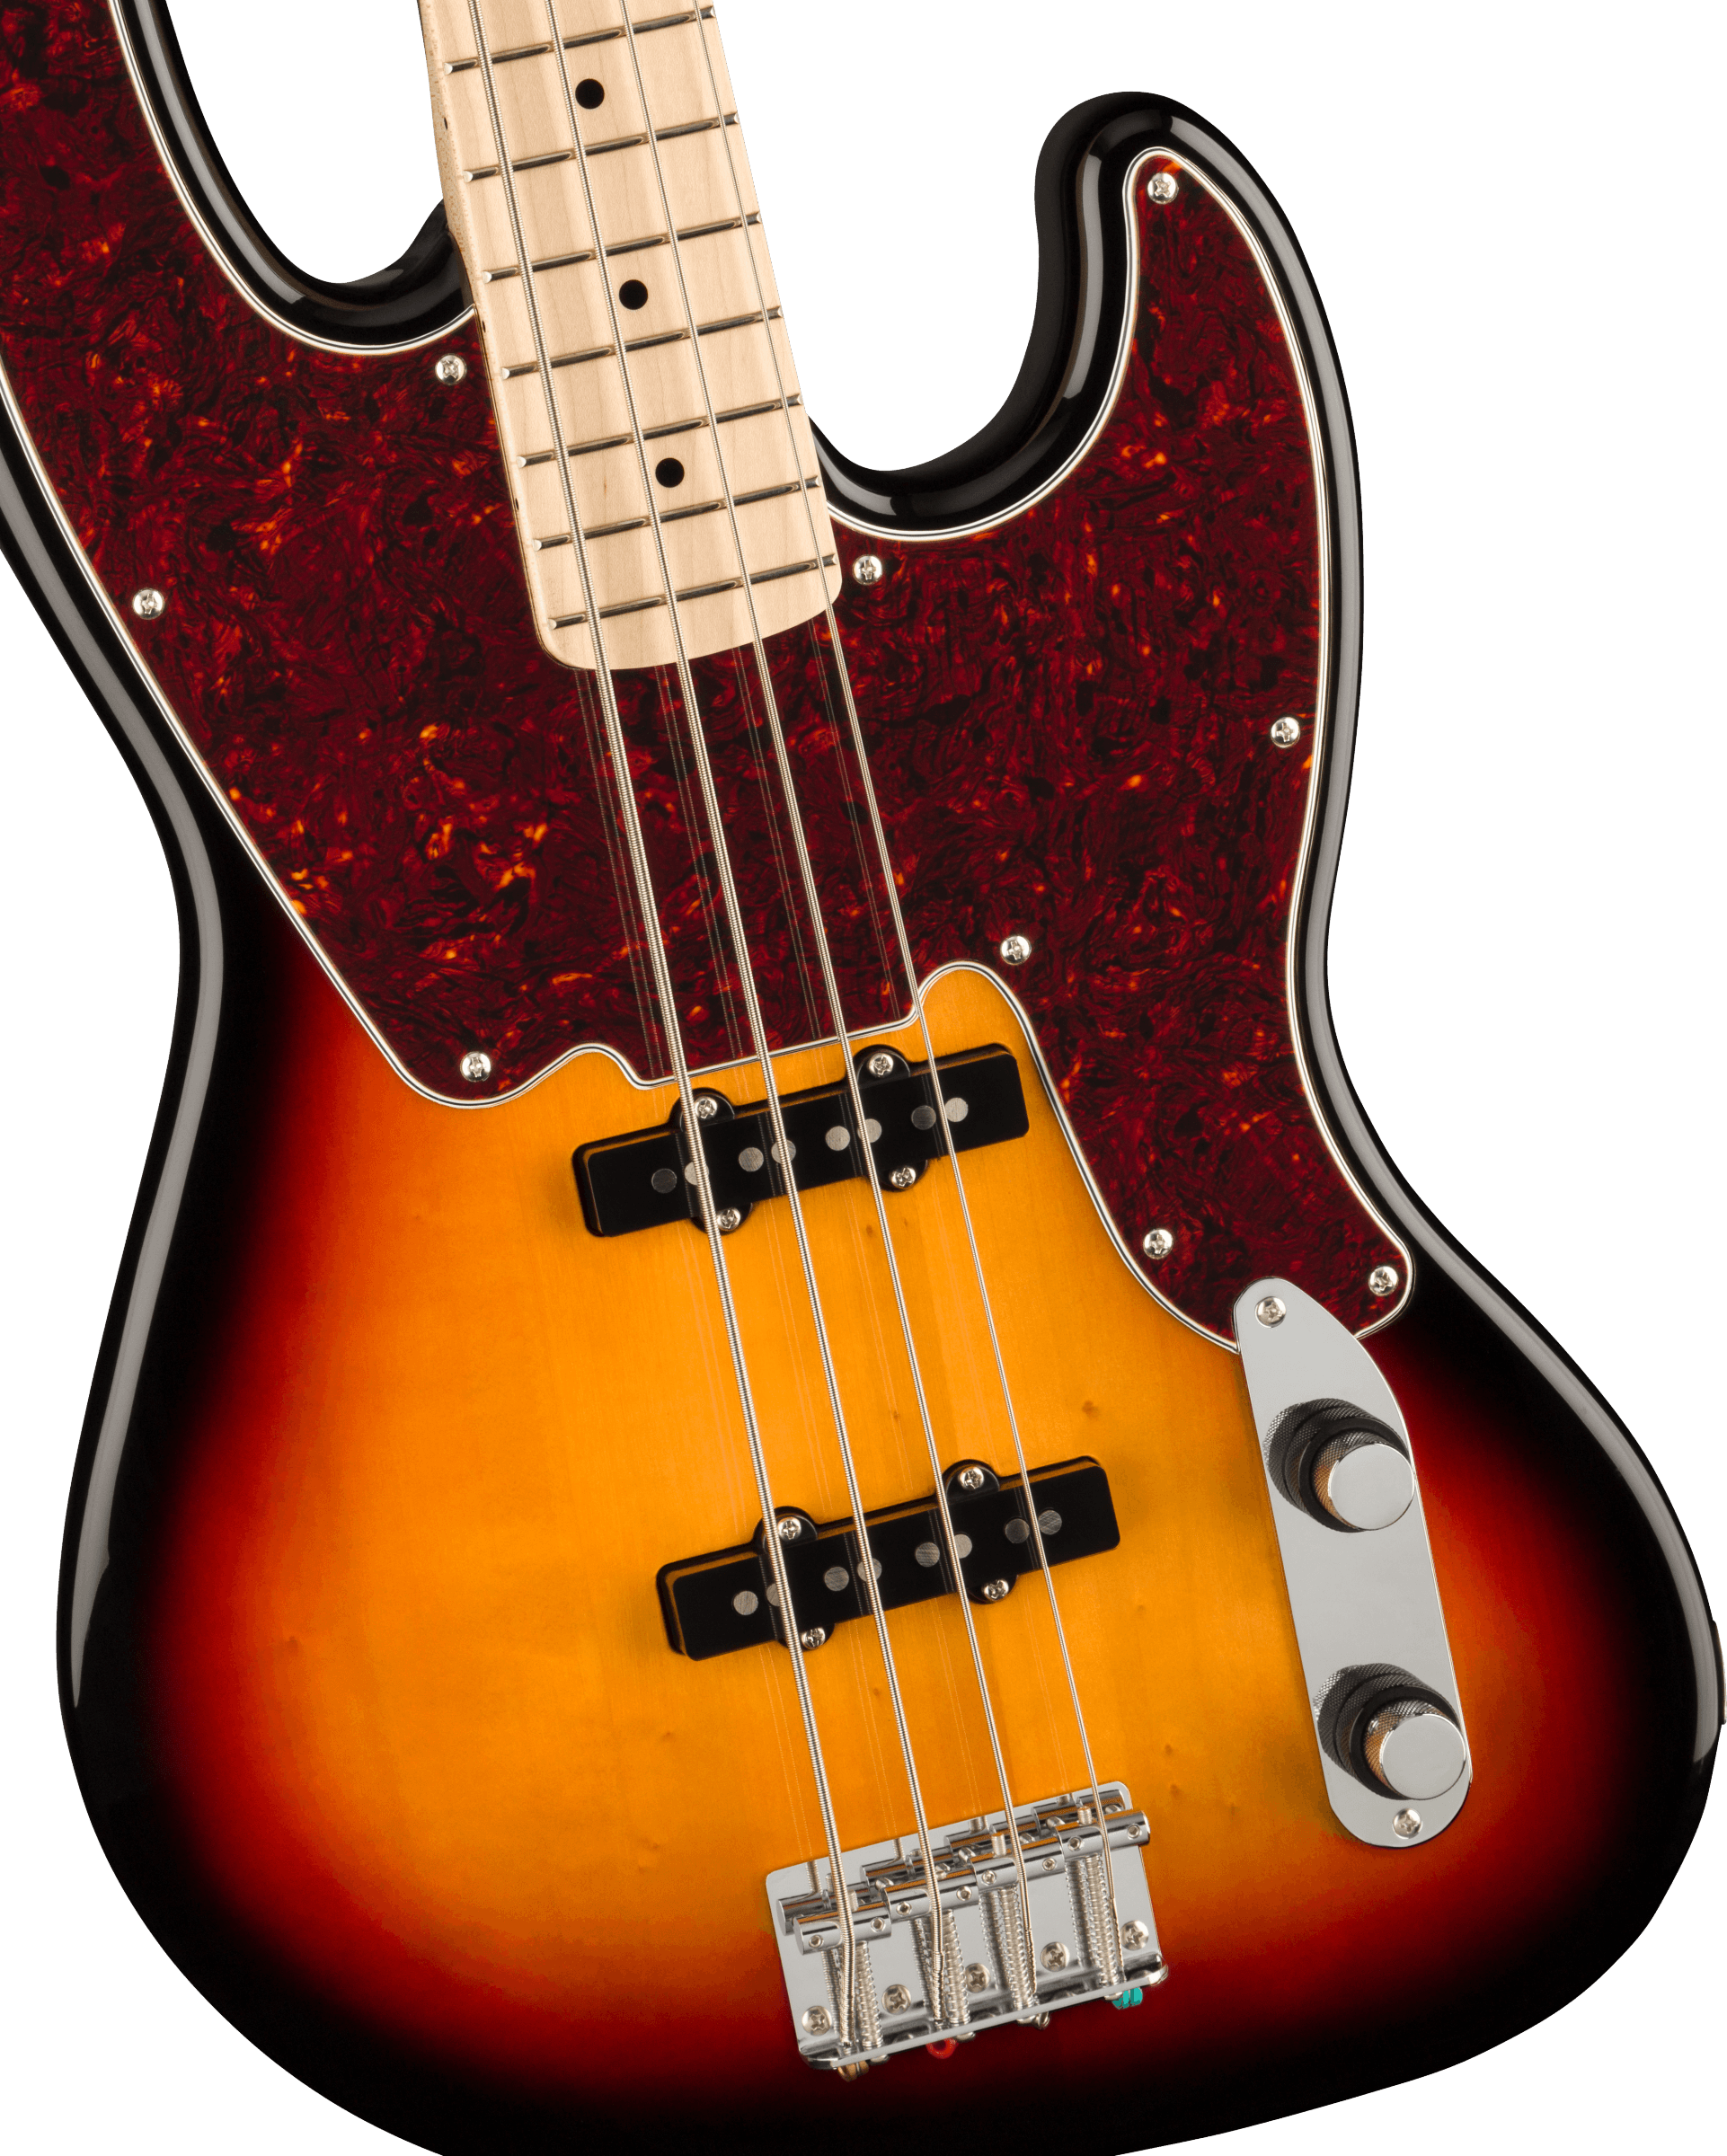 Squier Jazz Bass 1954 Paranormal Mn - 3 Tone Sunburst - Solid body electric bass - Variation 2